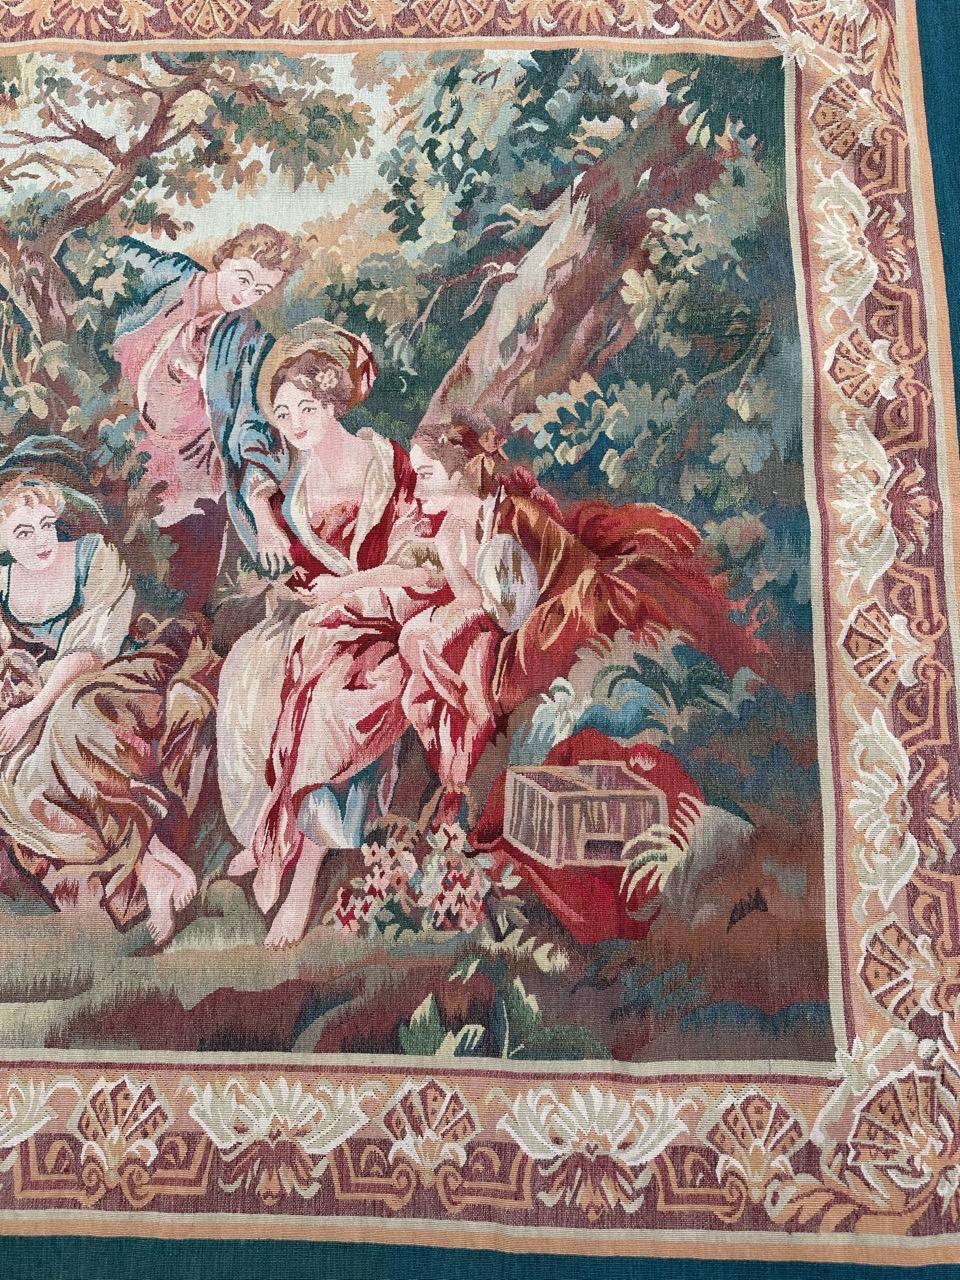 Very beautiful Aubusson style tapestry with beautiful gallant design with nice colors, entirely hand woven in Same method than Aubusson tapestries with wool on cotton foundation.

✨✨✨
